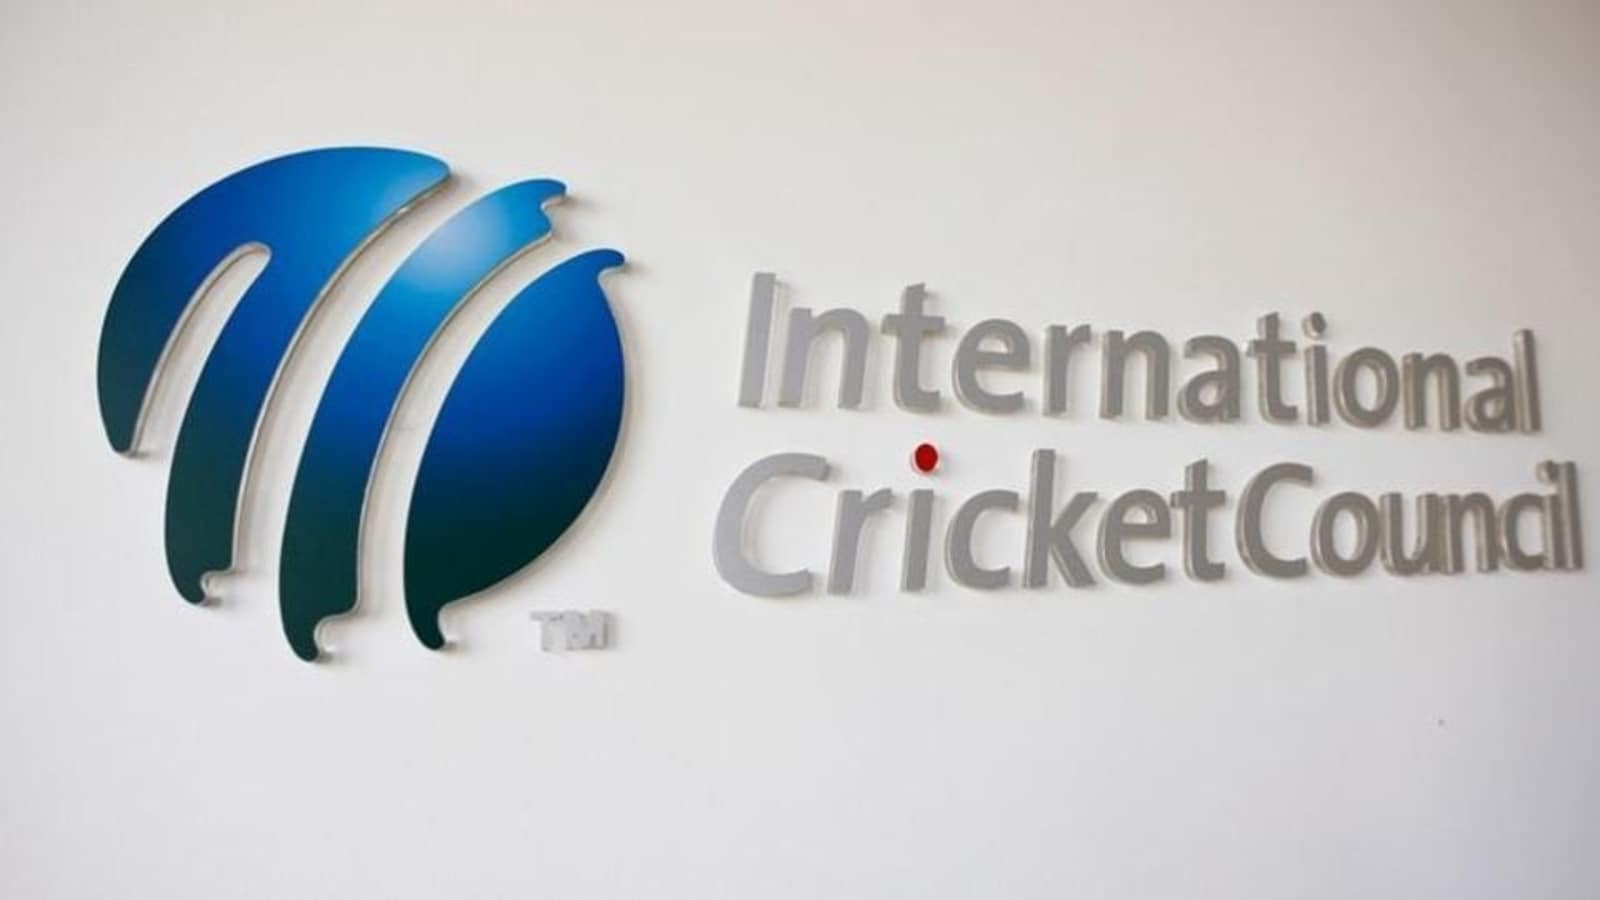 ICC Media Rights: For the first time, media rights for men's and women's tournaments will be sold separately